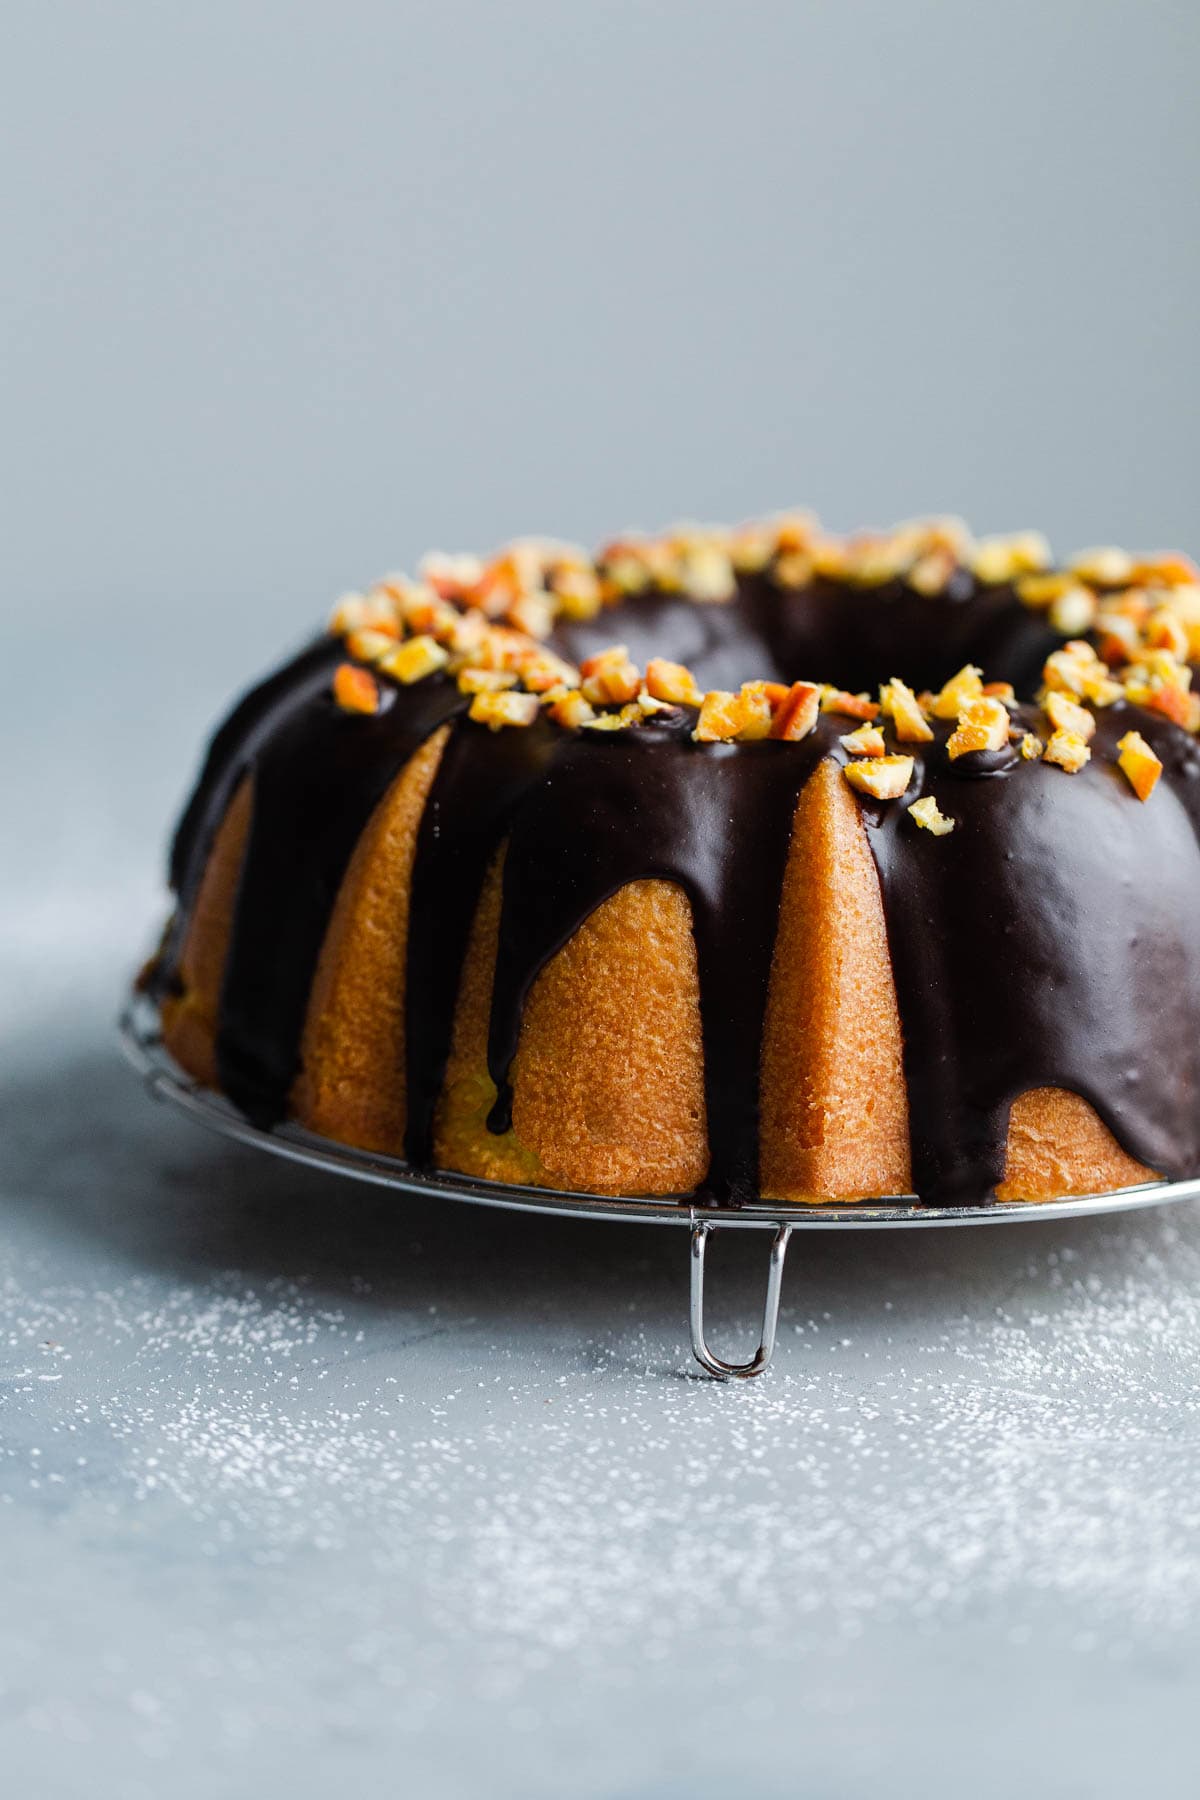 Success with Nordic Ware Gingerbread Bundt for Gingerbread House! Method in  comments! : r/Baking